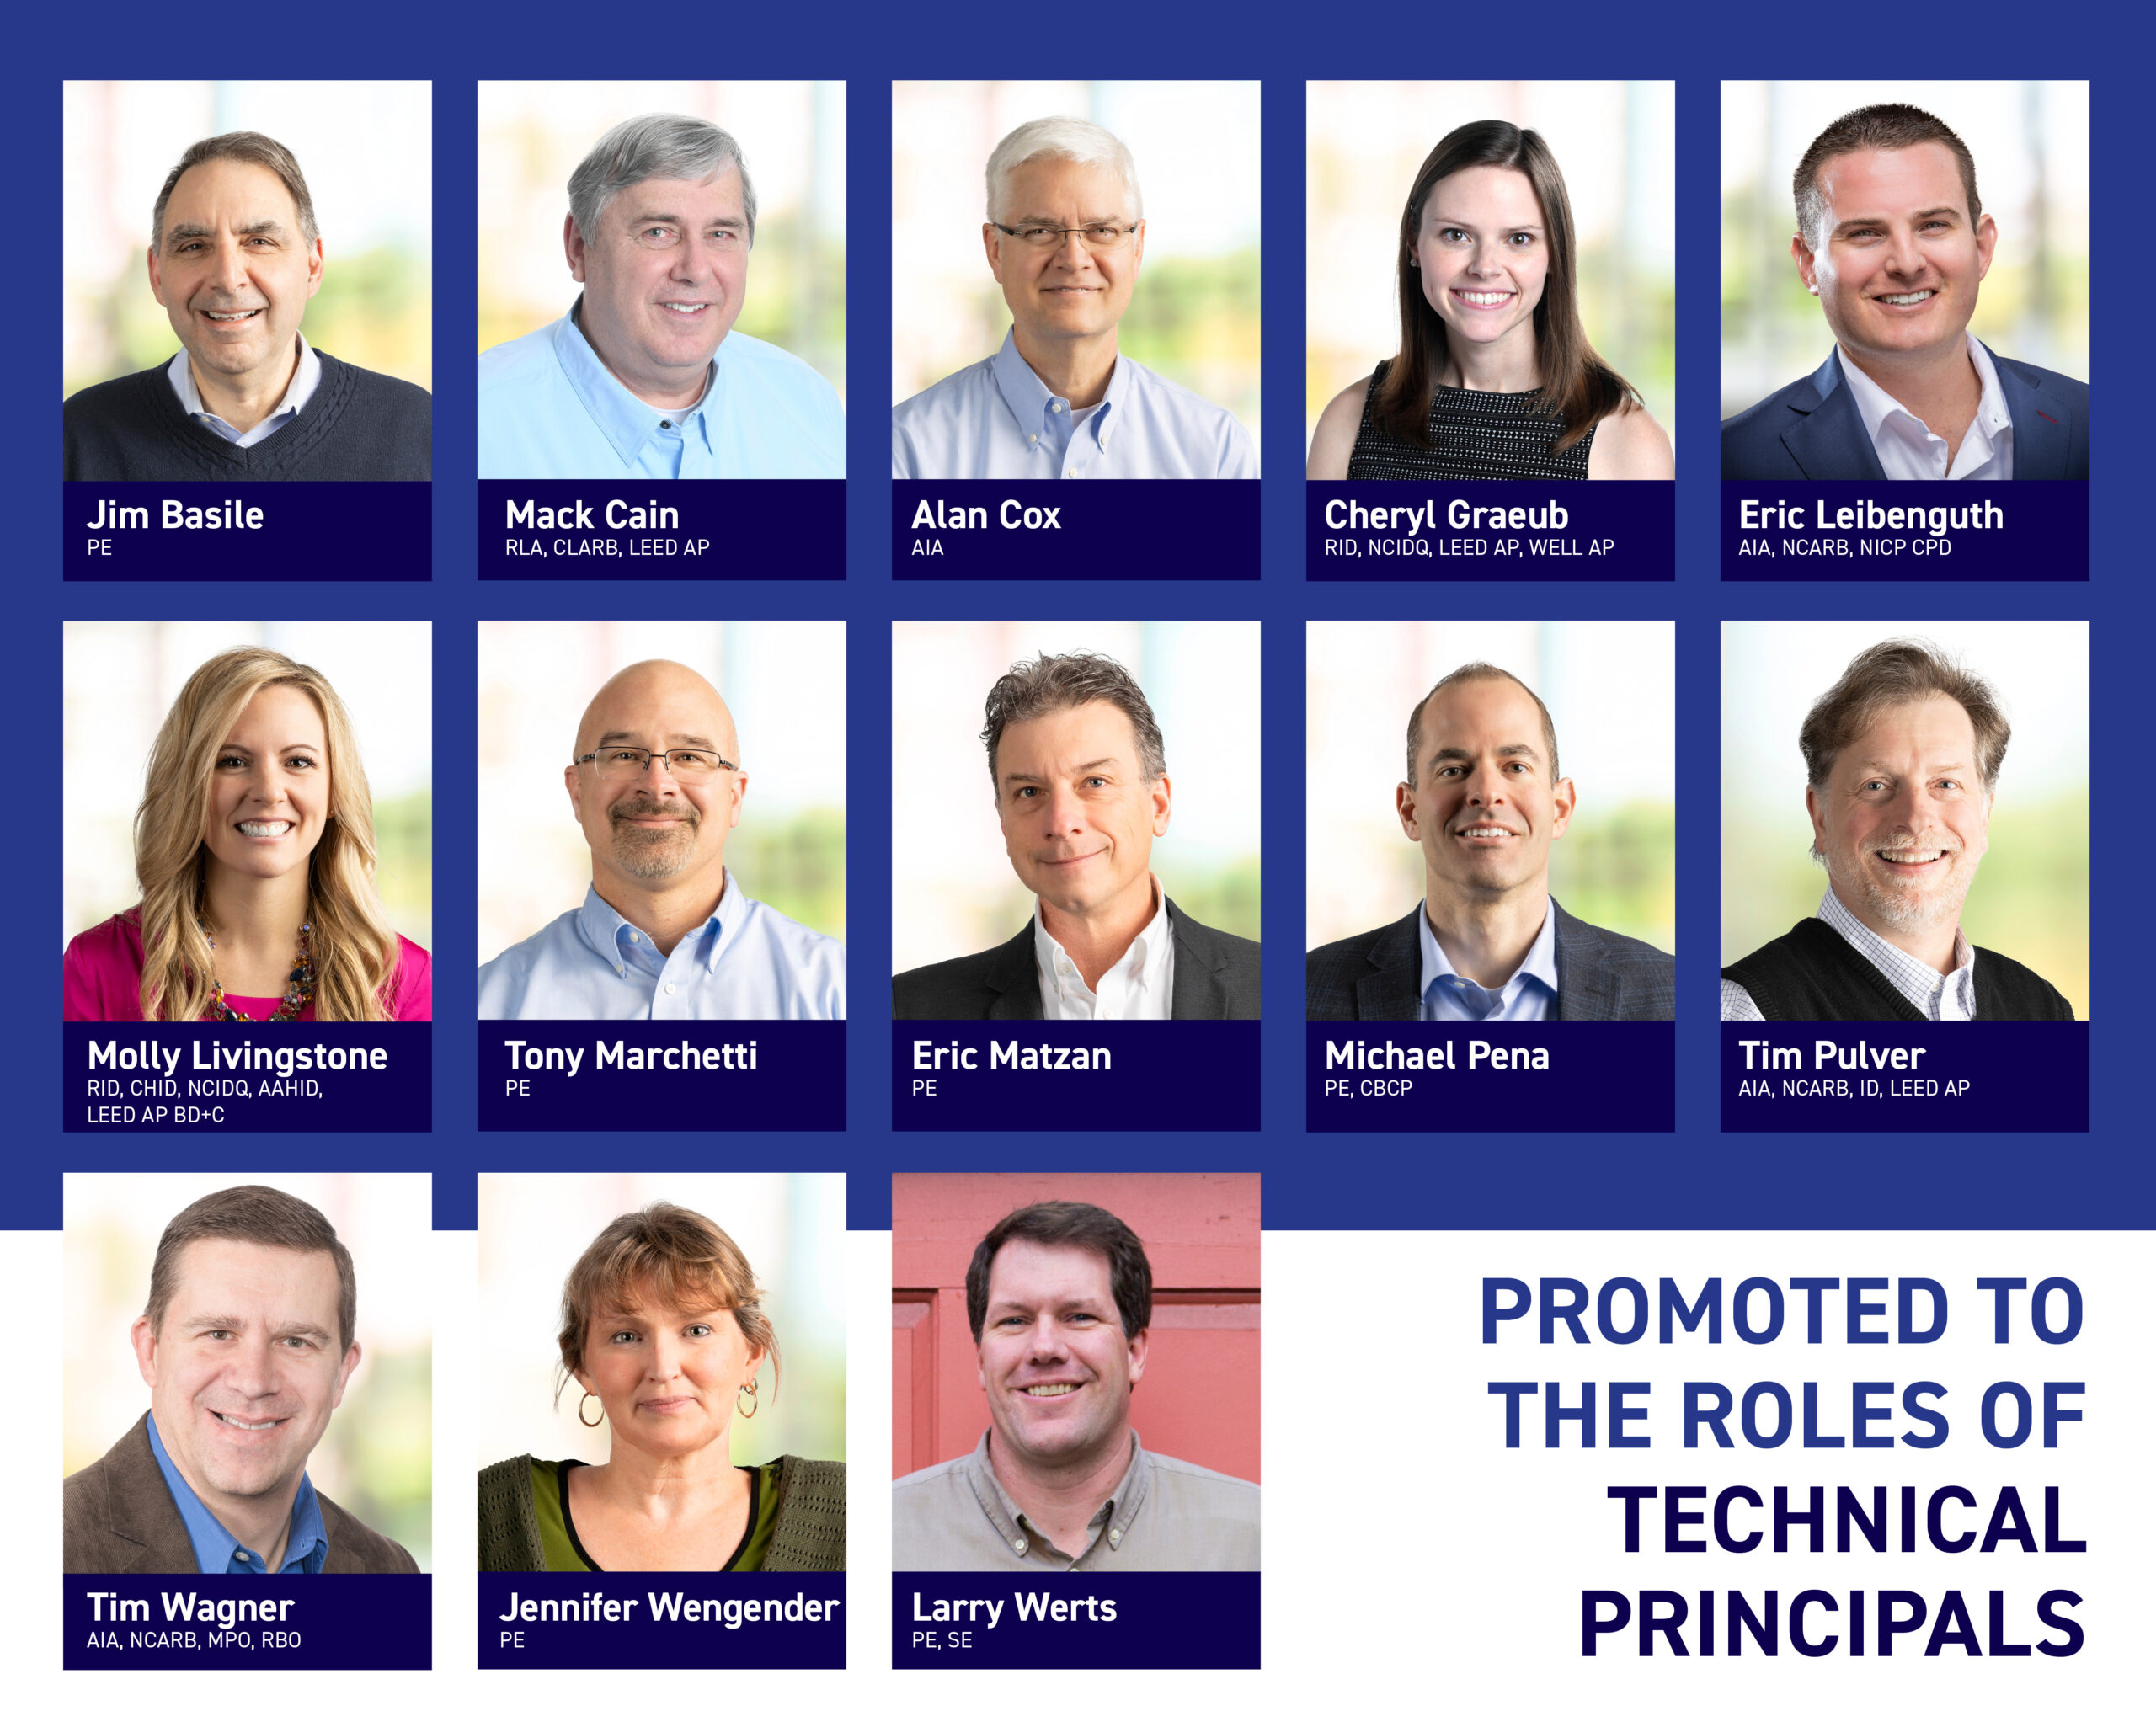 Image shows 13 headshots with names and titles below. On the bottom right it reads "Promoted to the Roles of Technical Principals"